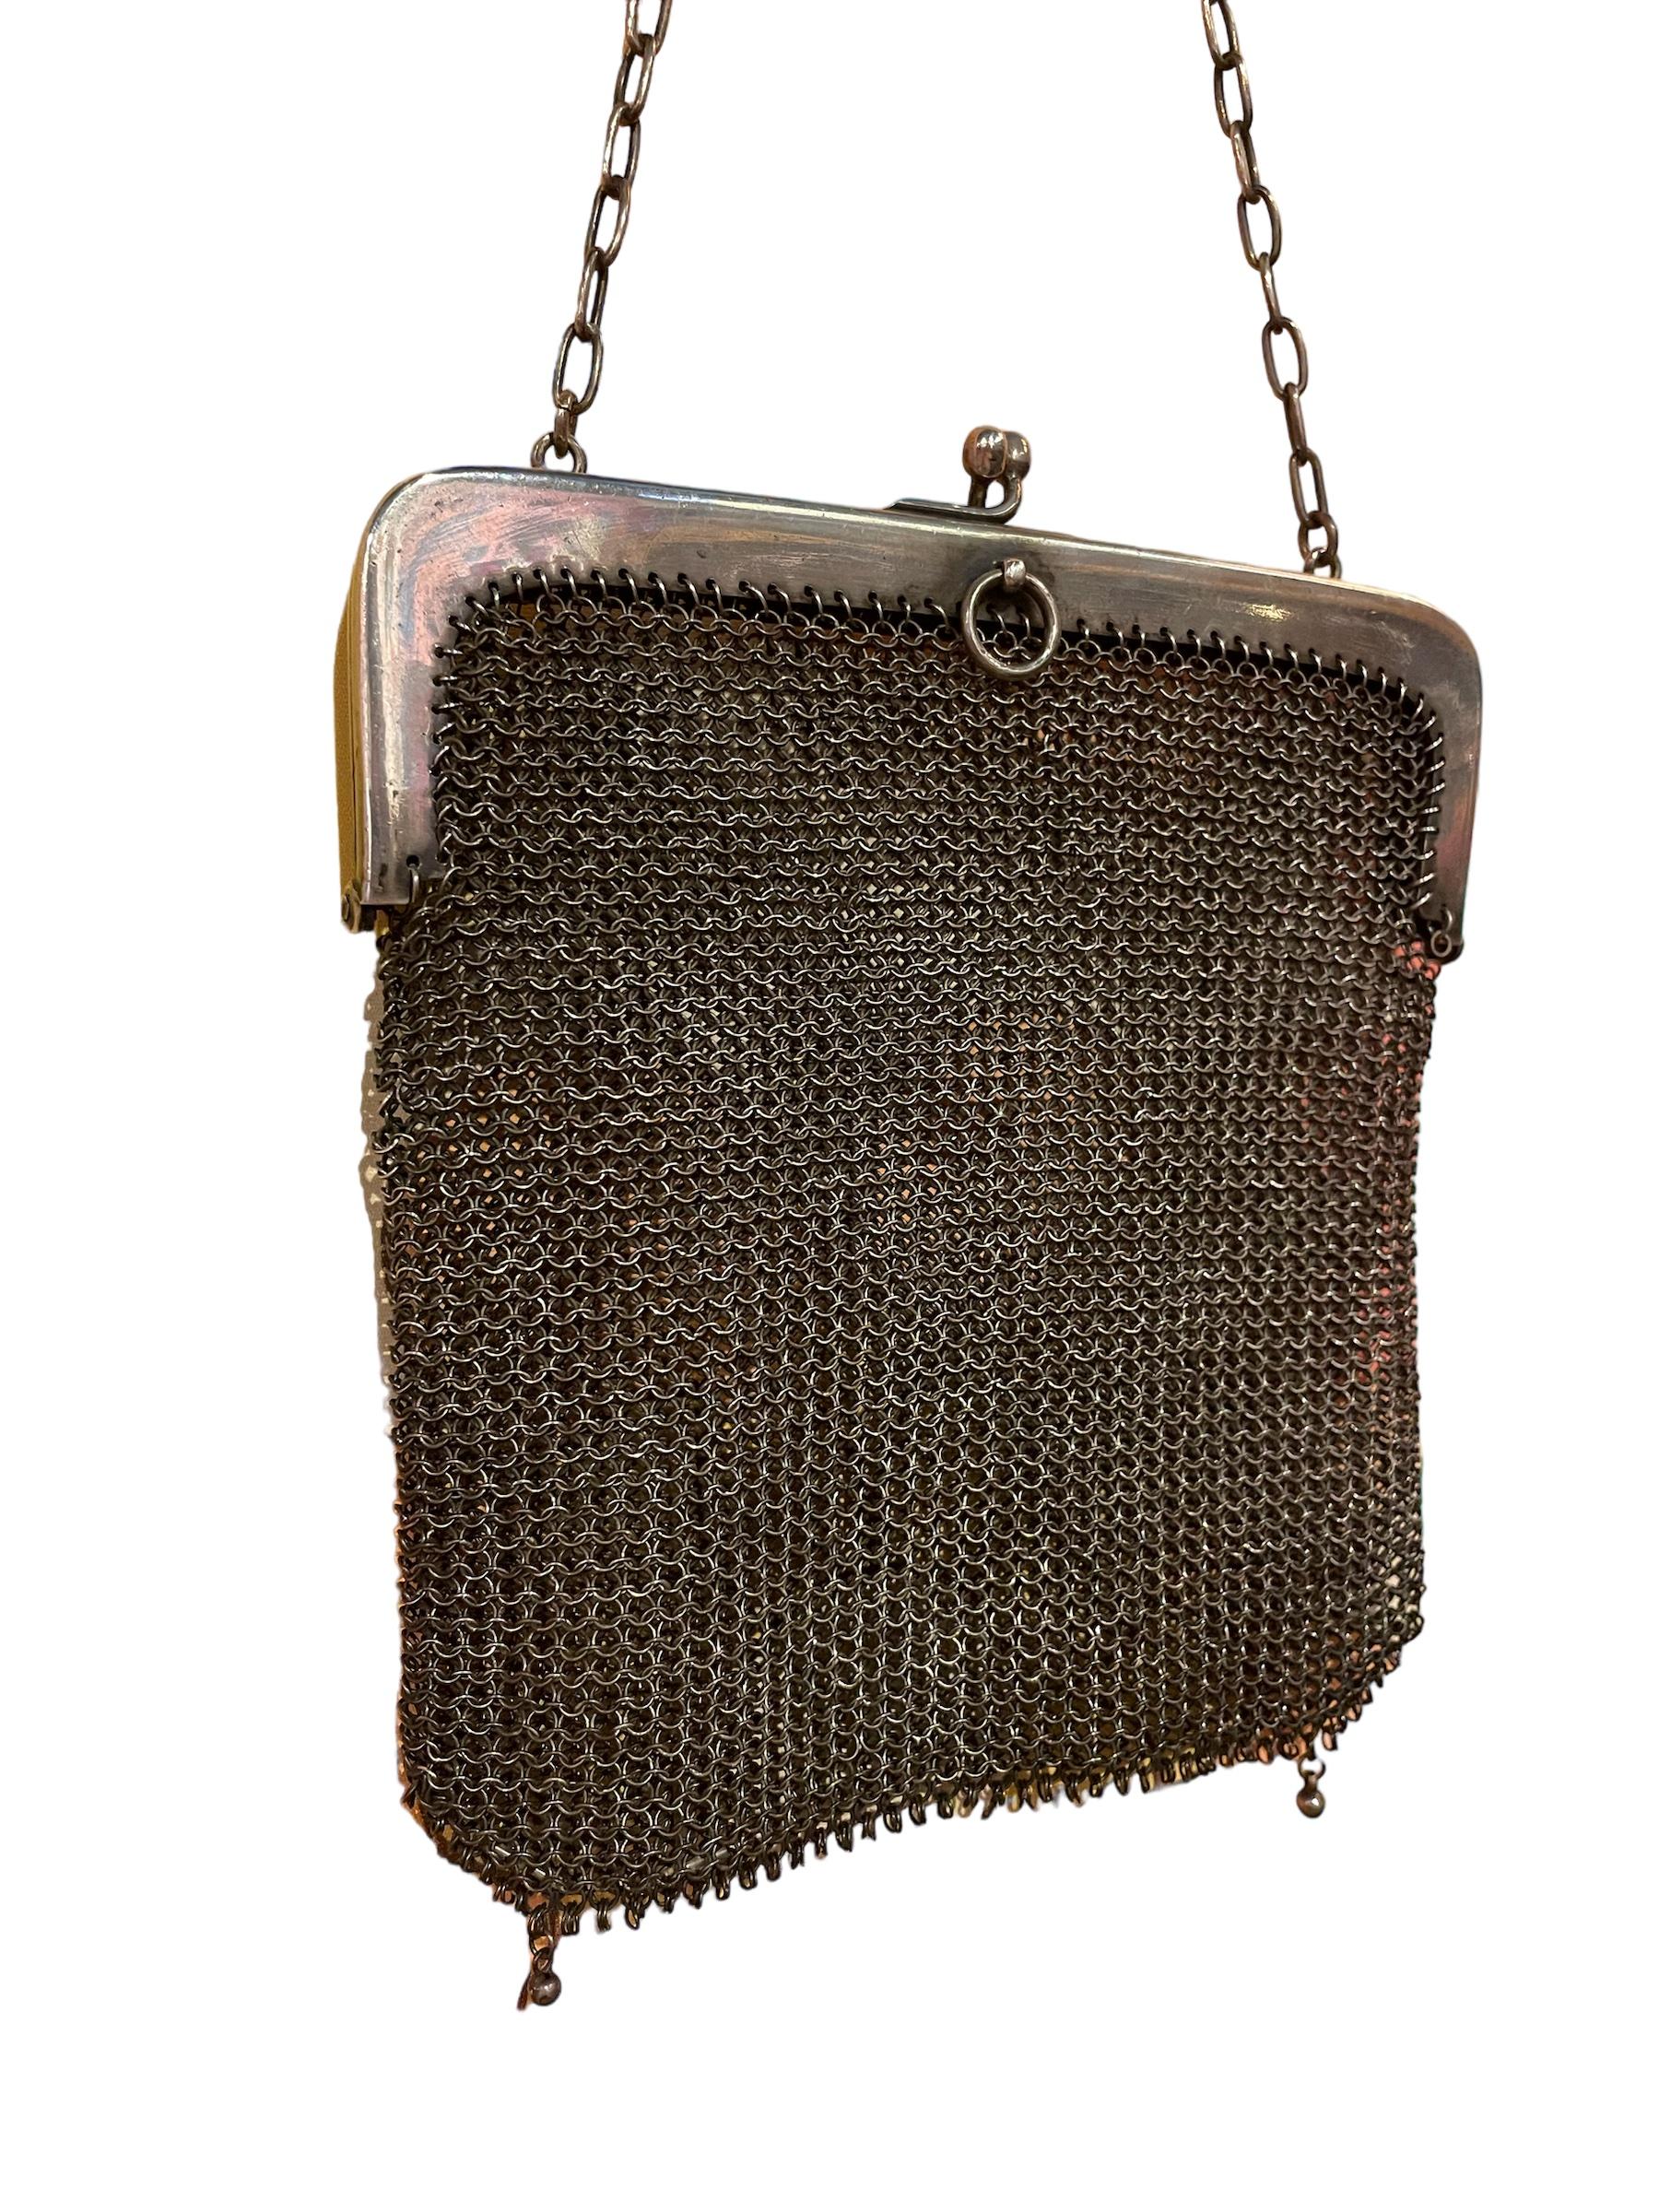 1907 Chain Metal Purse  In Good Condition For Sale In Greenport, NY